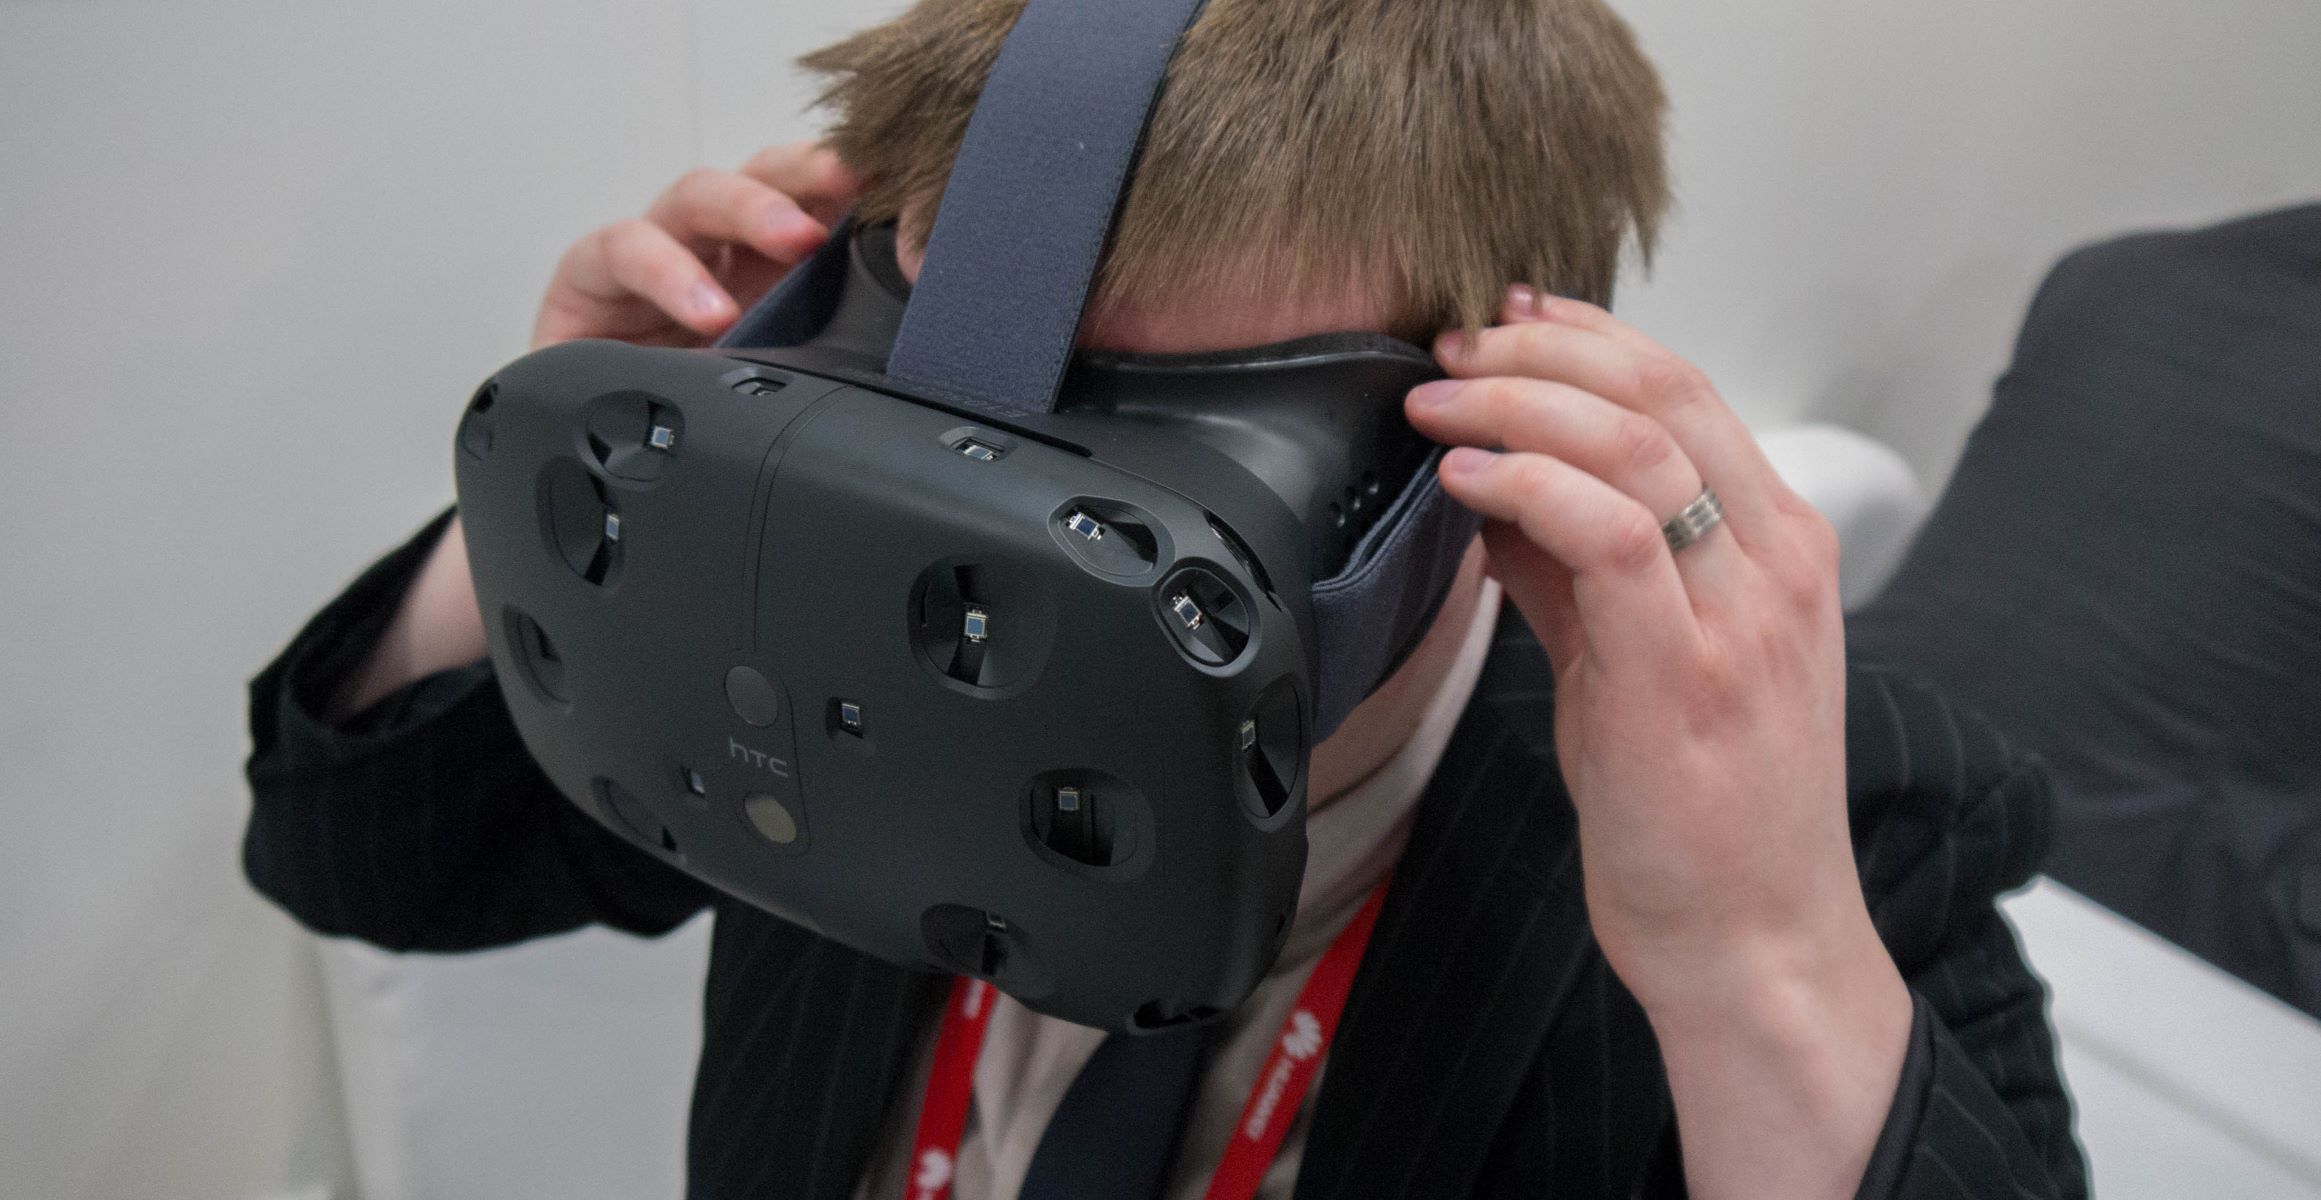 How To Check If Your HTC Vive Headset Is On